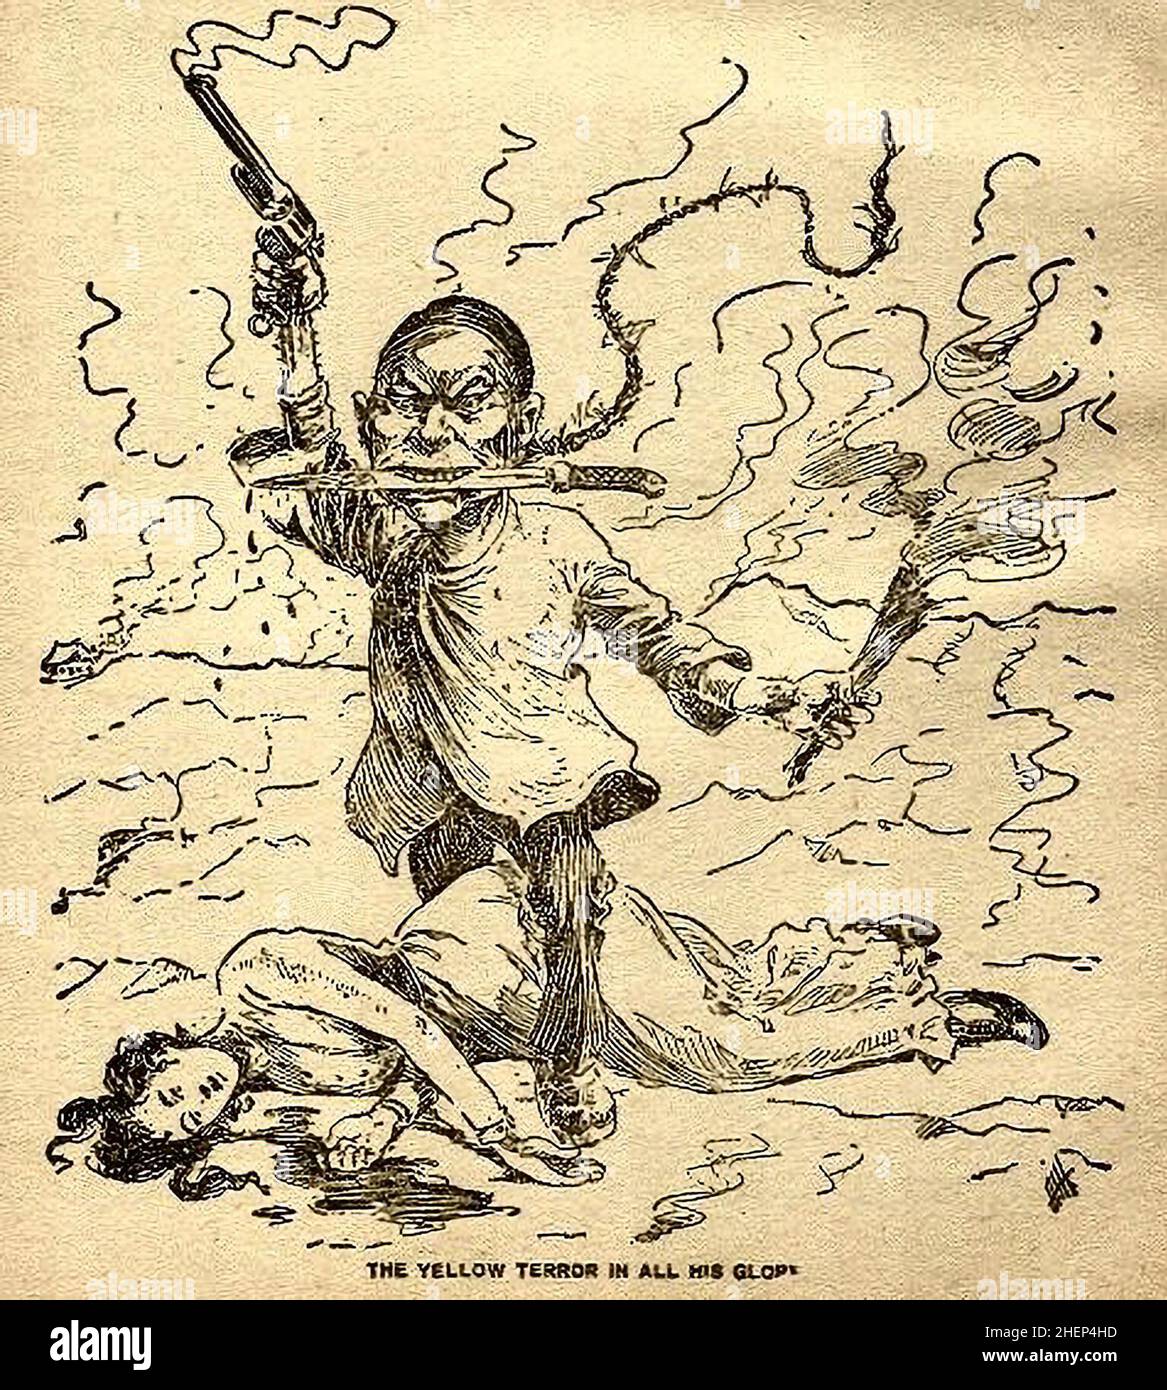 Caricature of  Yellow Peril, 'The Yellow Terror In All His Glory' , 1899, Private Collection. Traditional costume Chinese man trampling down white woman. Stock Photo